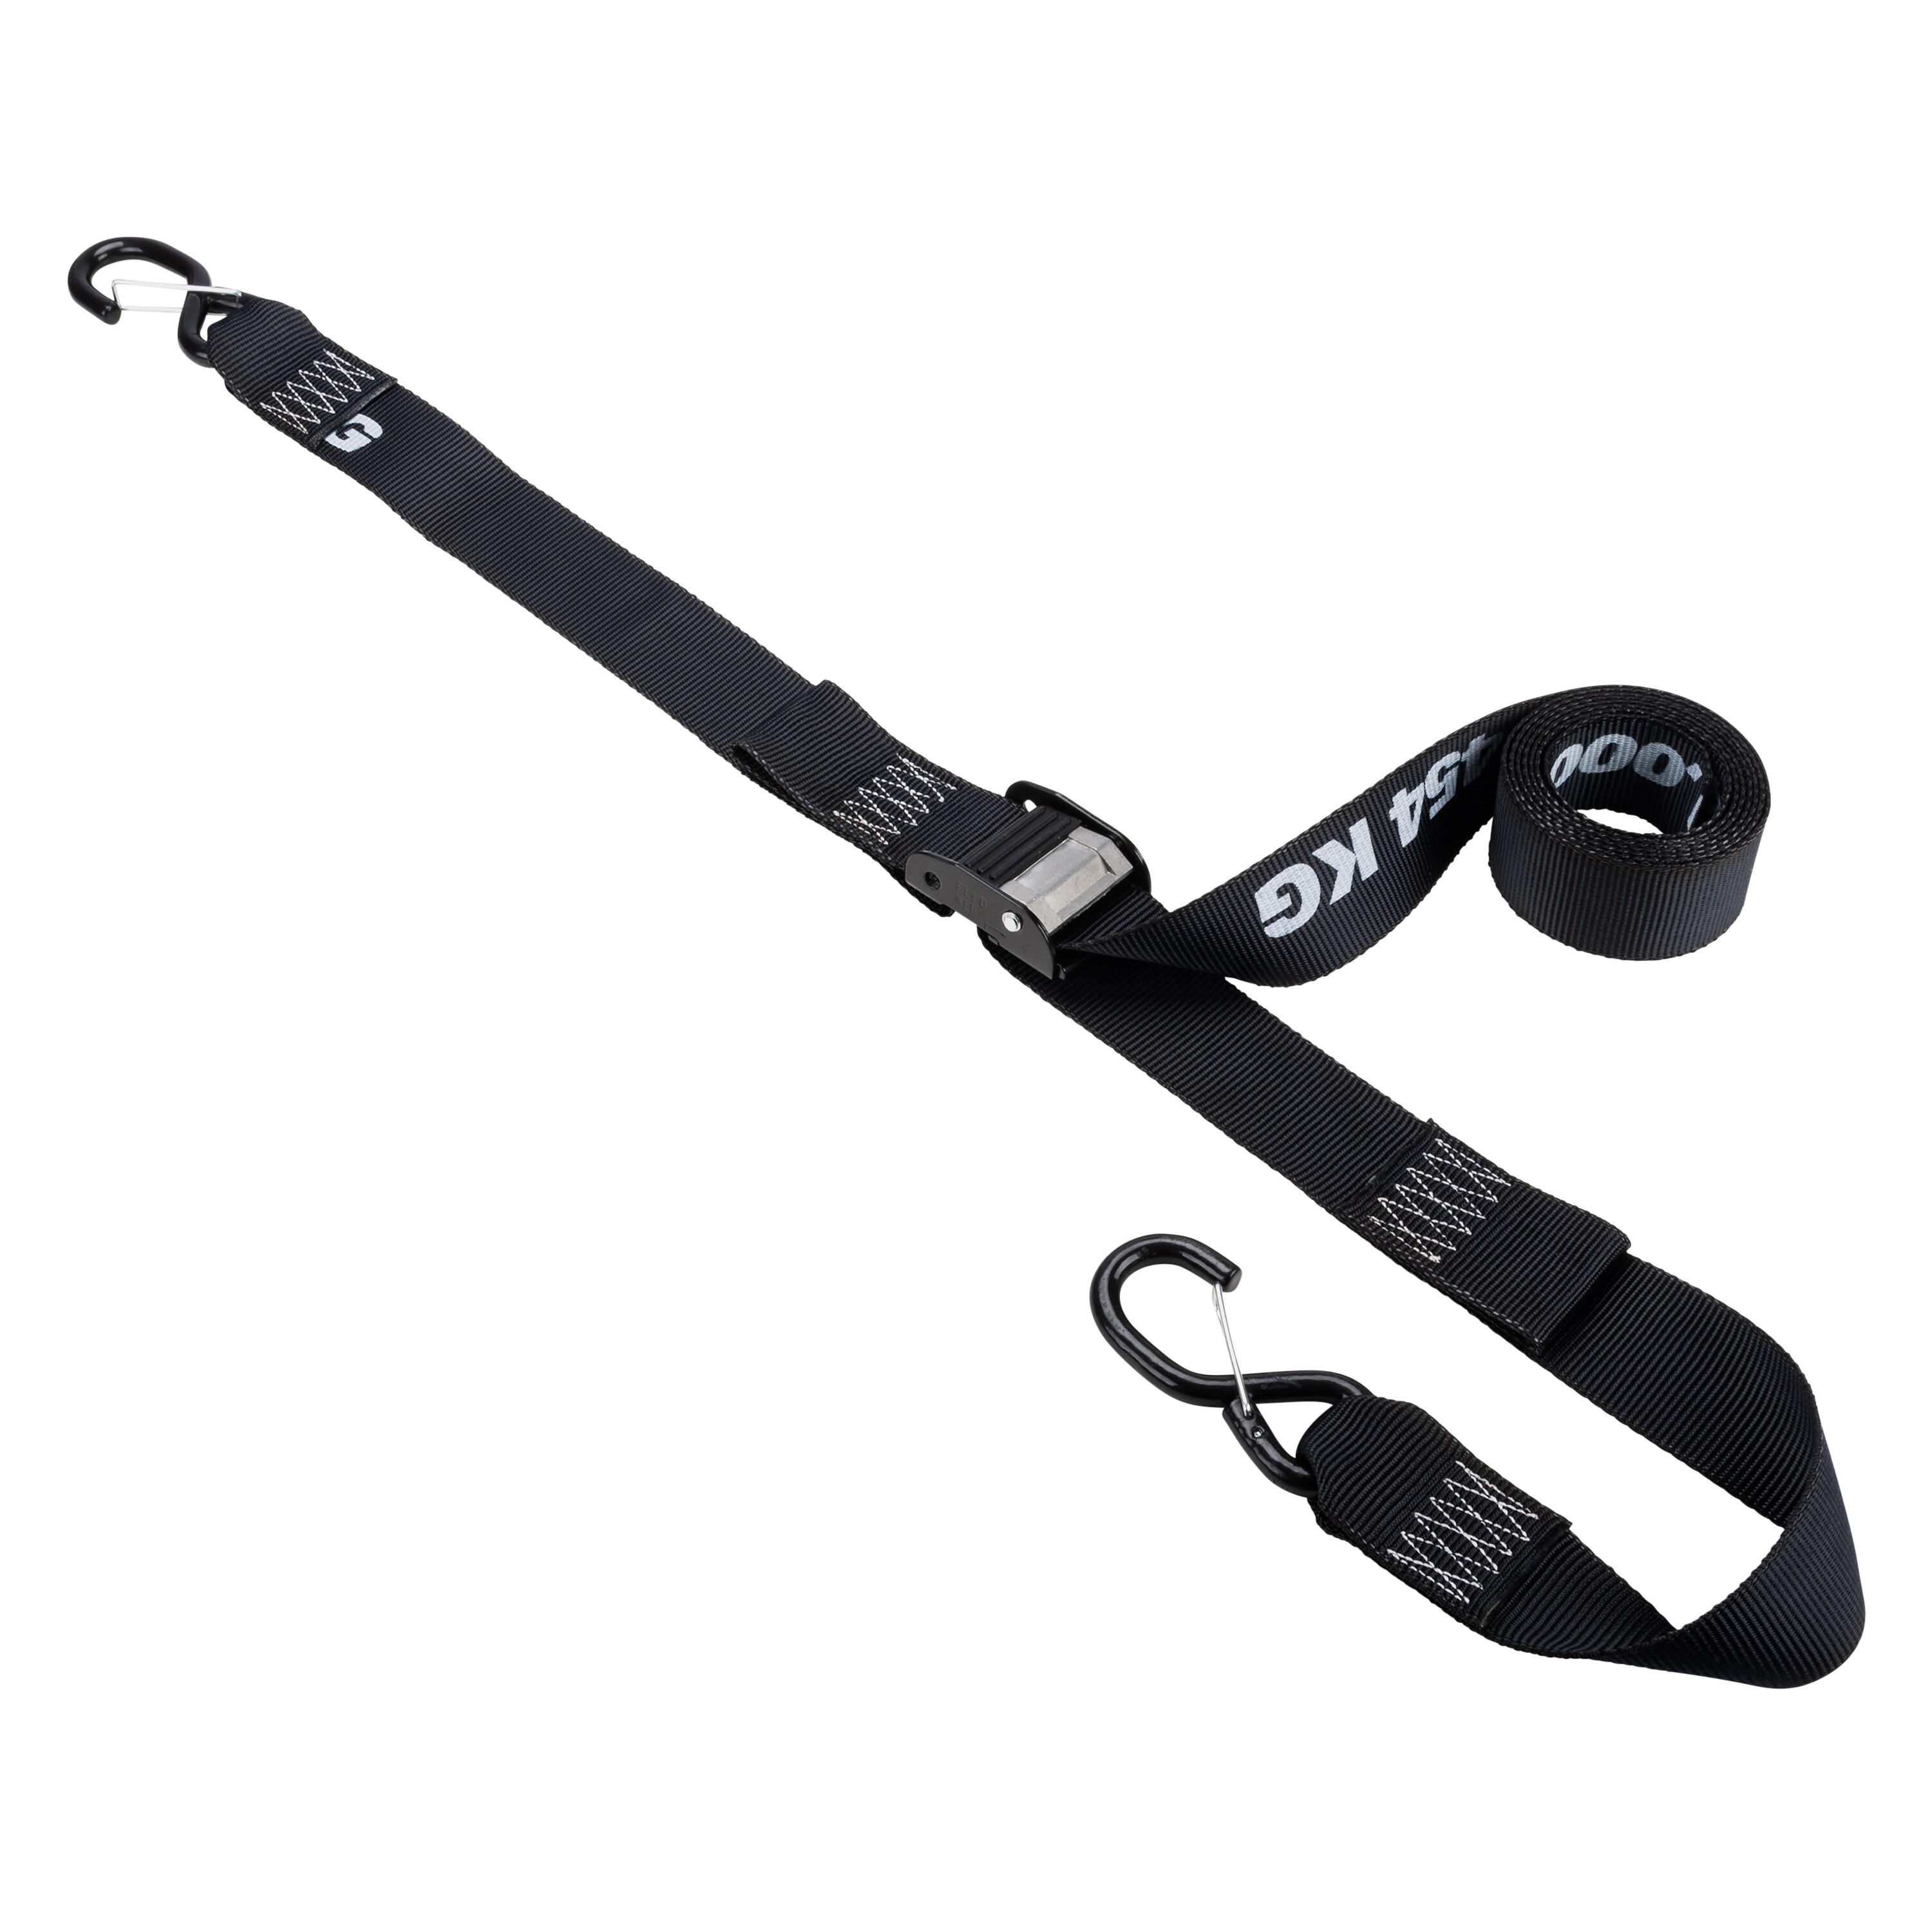 2 x 10' Cam Buckle Tie-Down with S hooks — Keeper Products